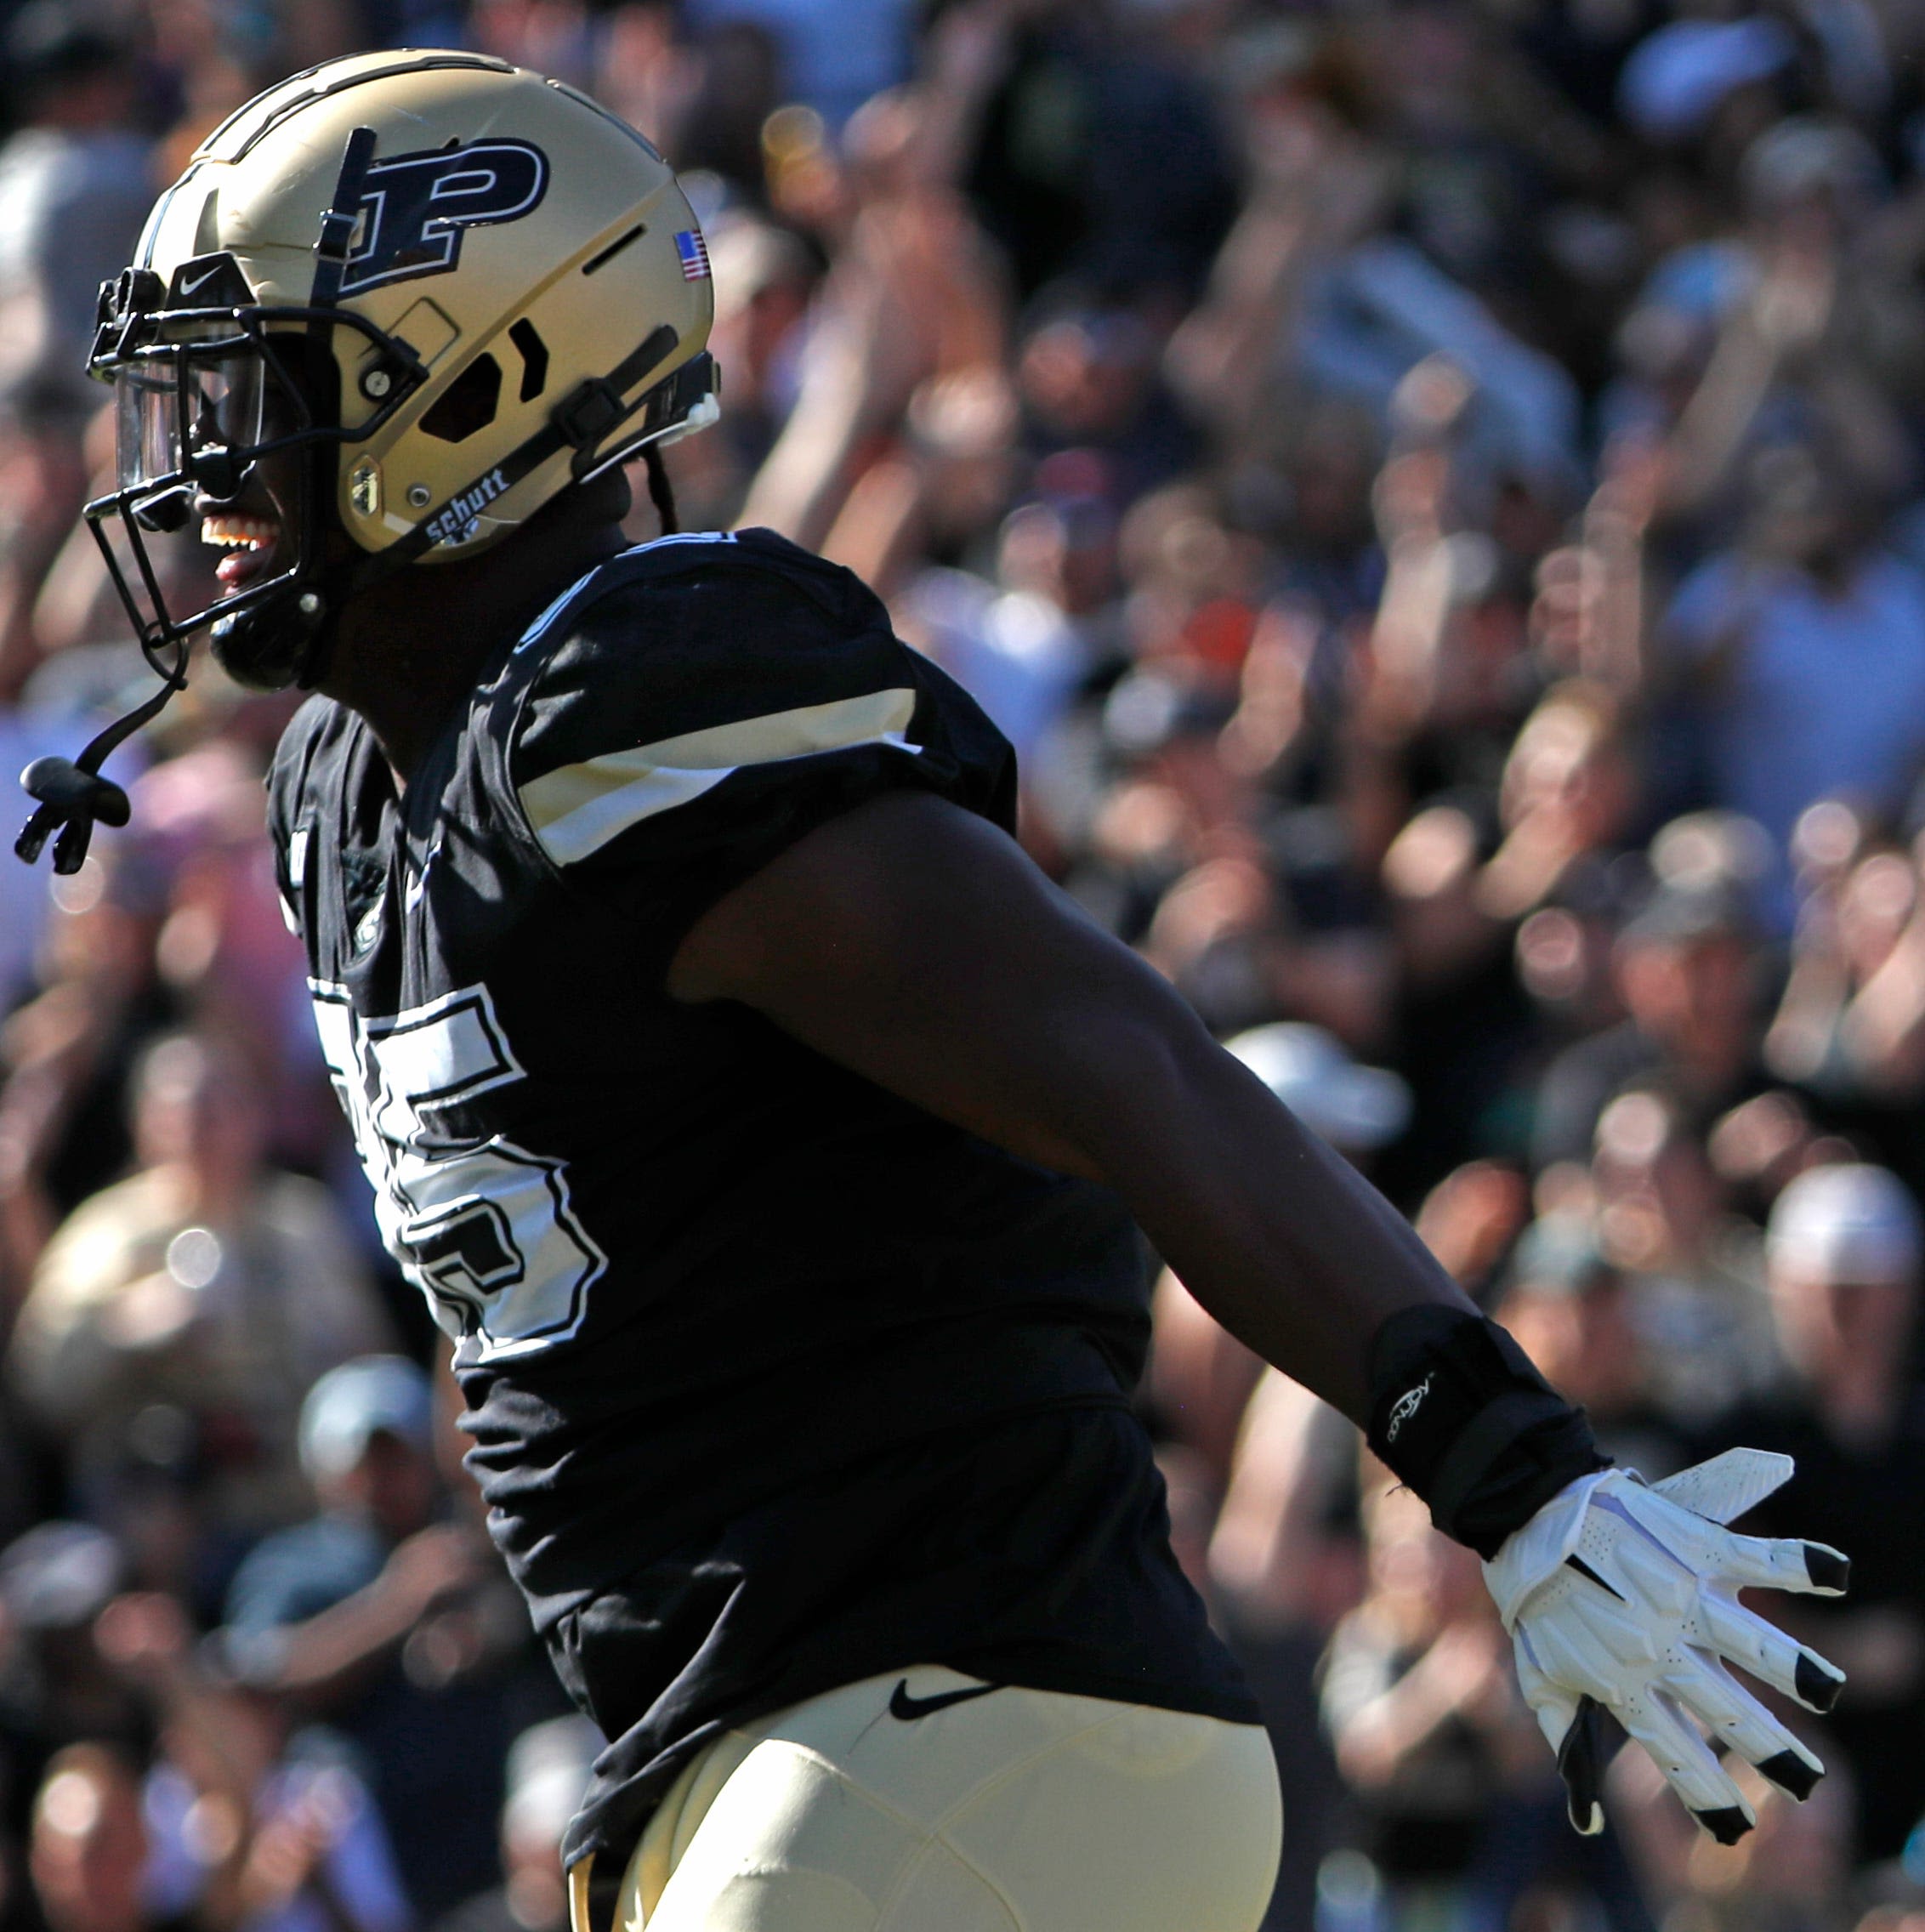 5 former Purdue football players signed UDFA deals with NFL teams. Where are the headed?